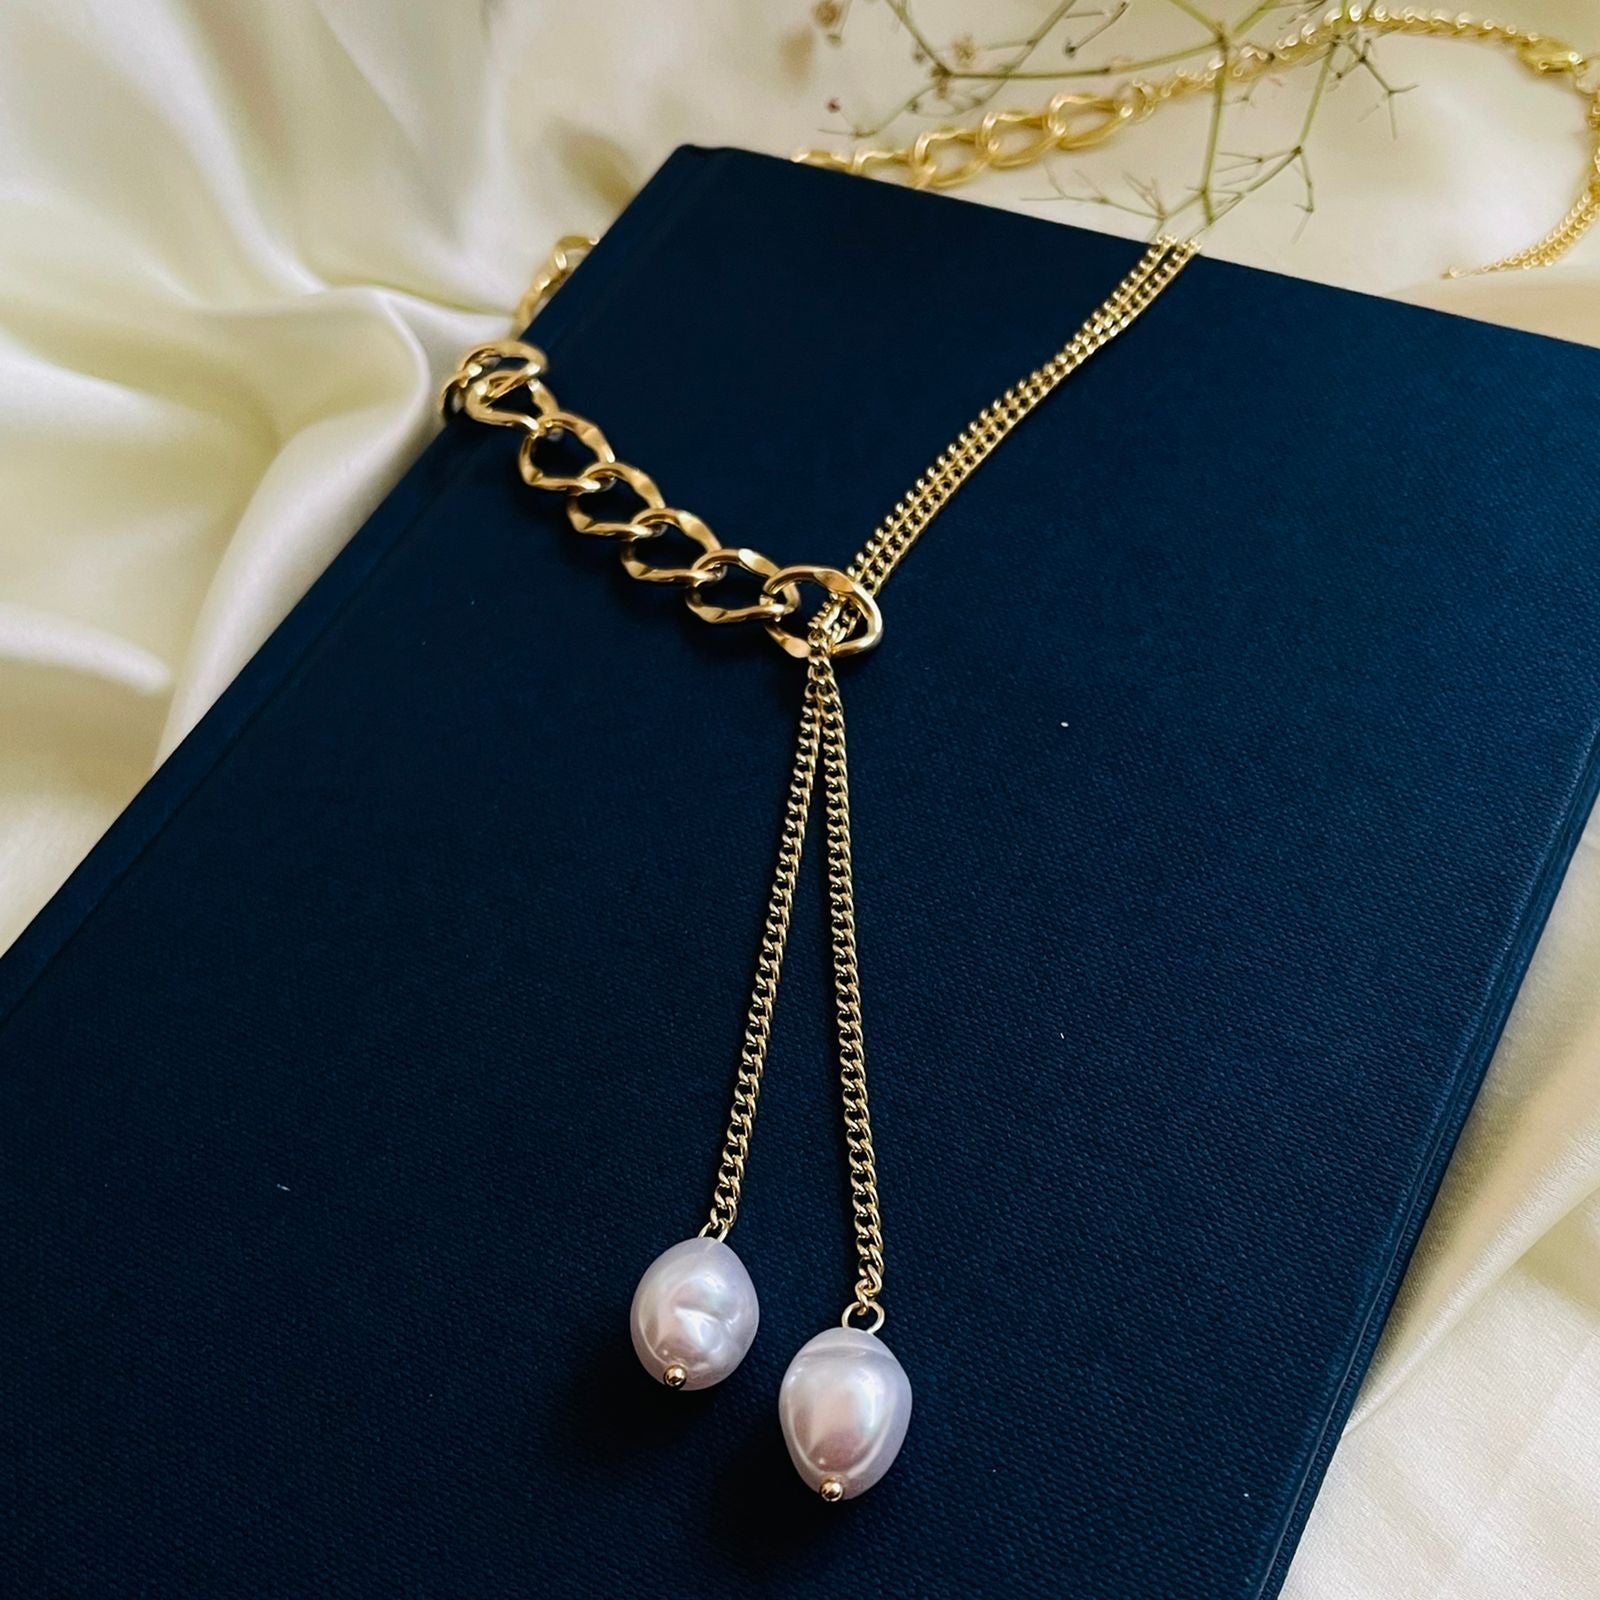 HALF FRESHWATER PEARL BEADED NECKLACE - The Littl A$154.99 A$164.99 14k  Yellow Gold Bridal (Jewellery Only) Chokers